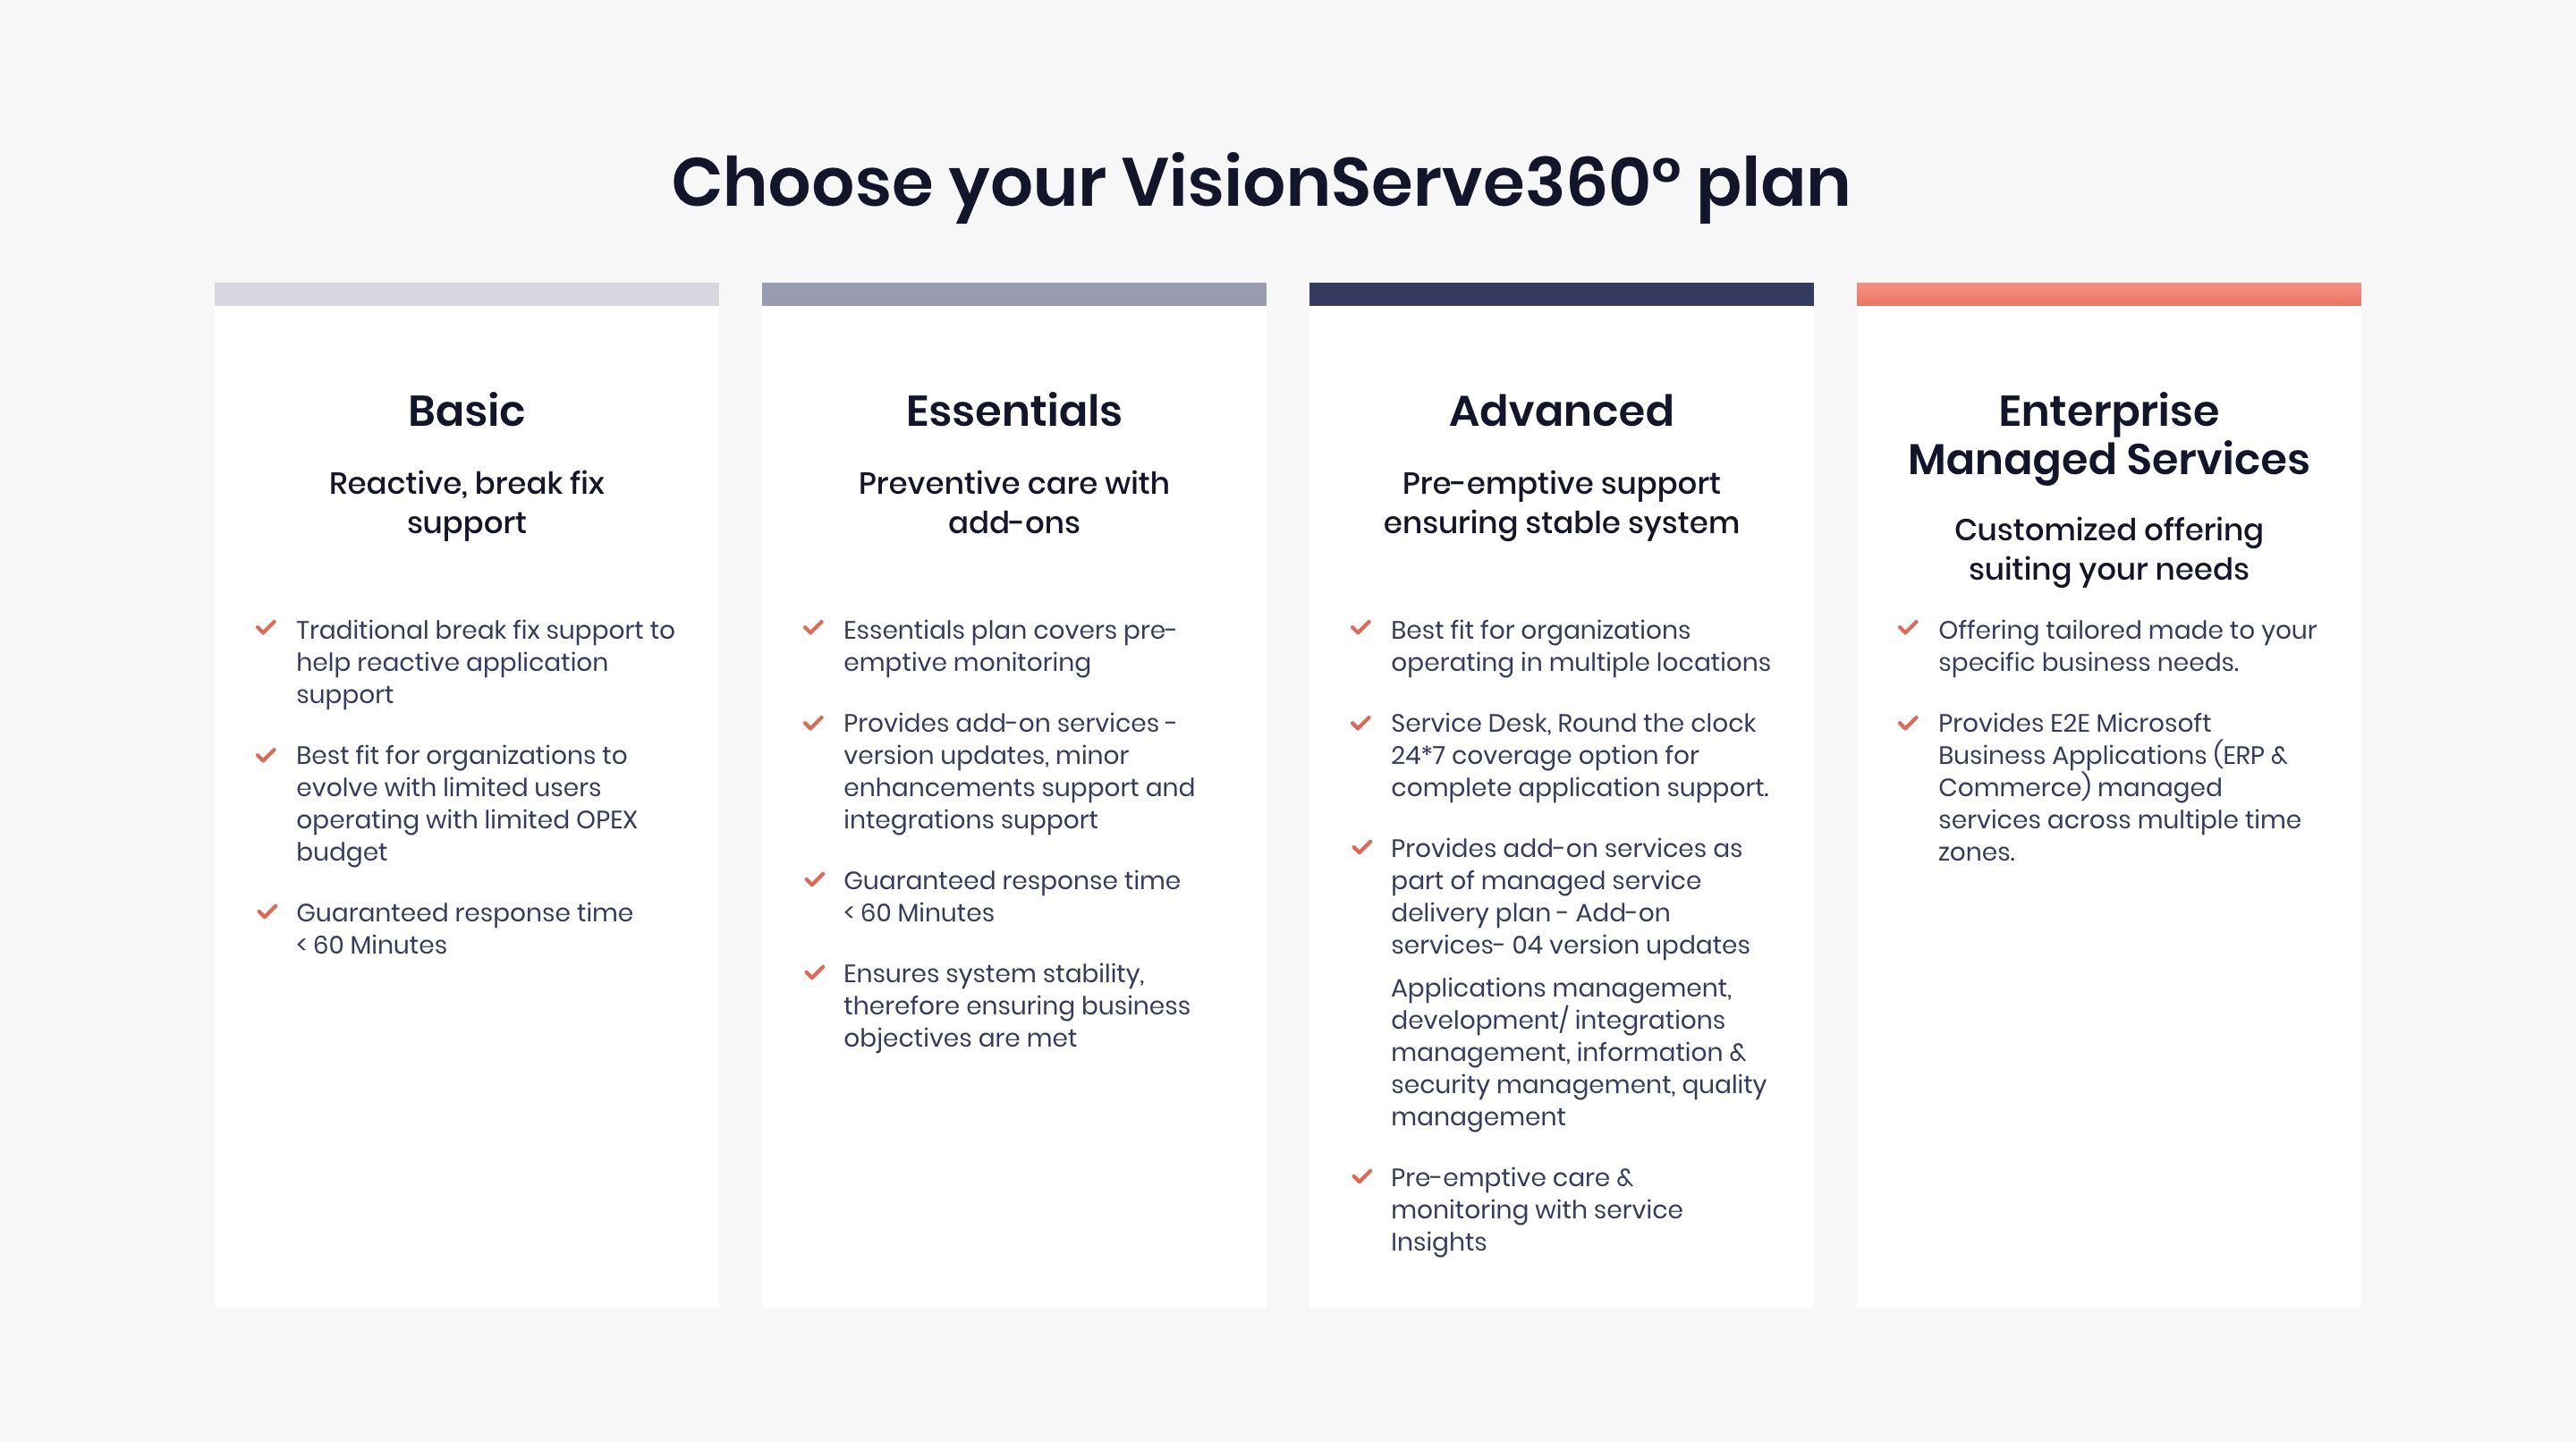 Visionet centerpiece for managed services for business applications